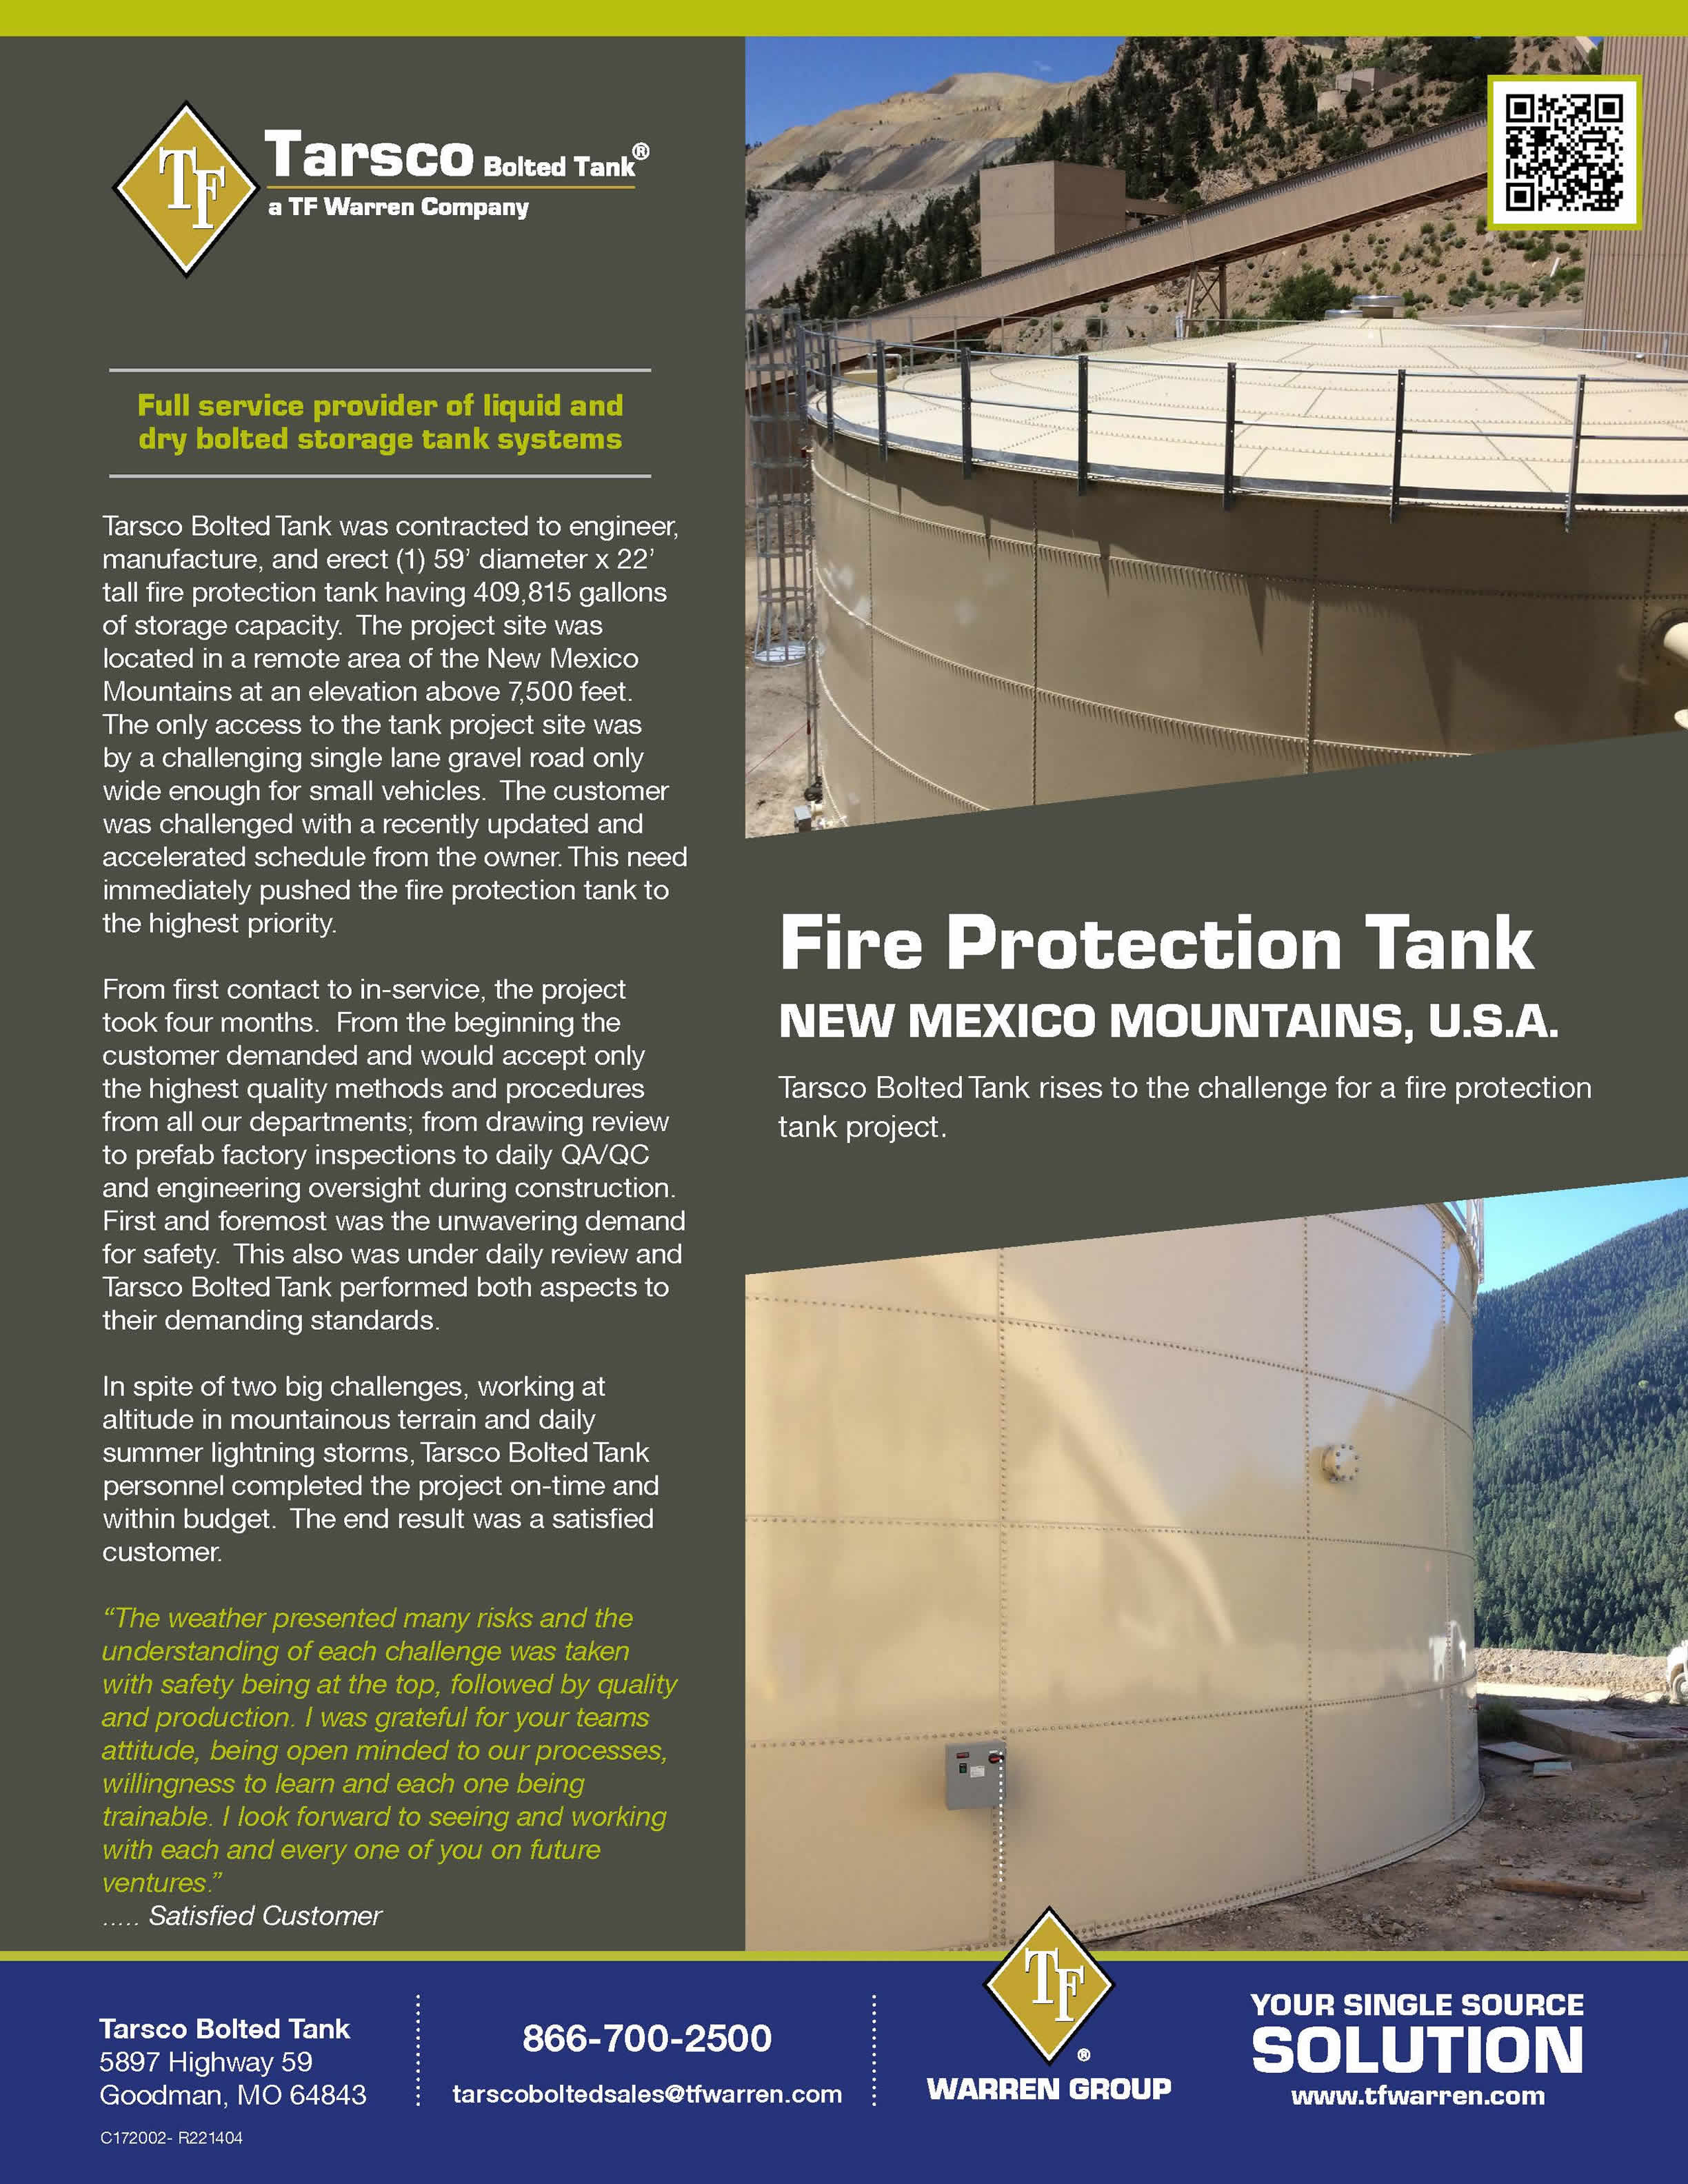 Fire Protection Tank, New Mexico Mountains